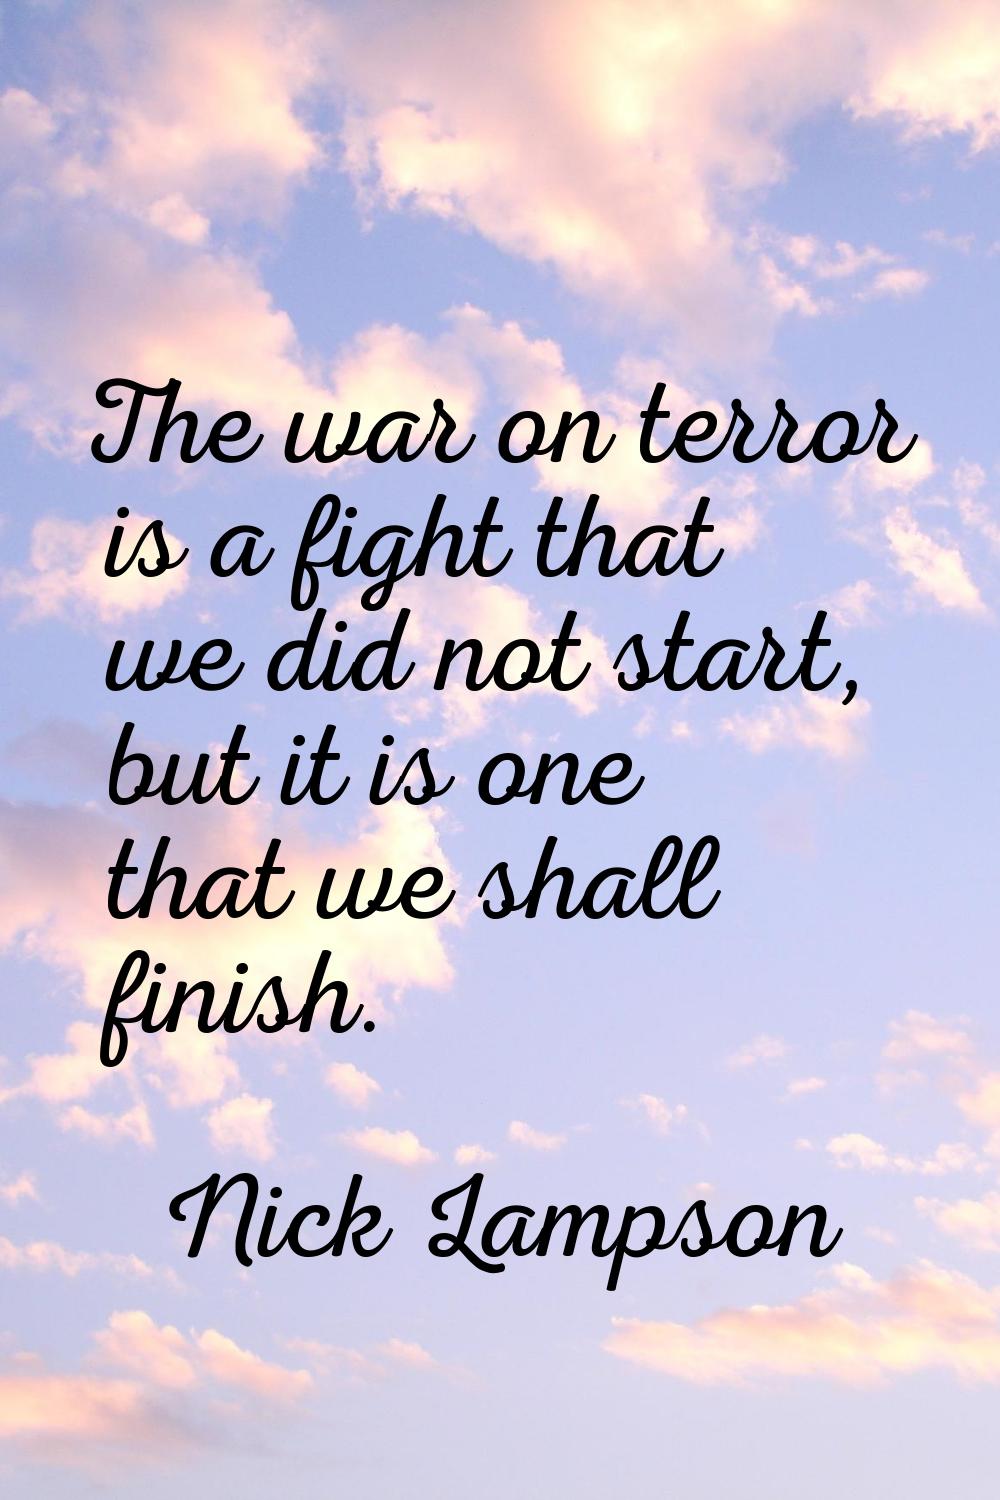 The war on terror is a fight that we did not start, but it is one that we shall finish.